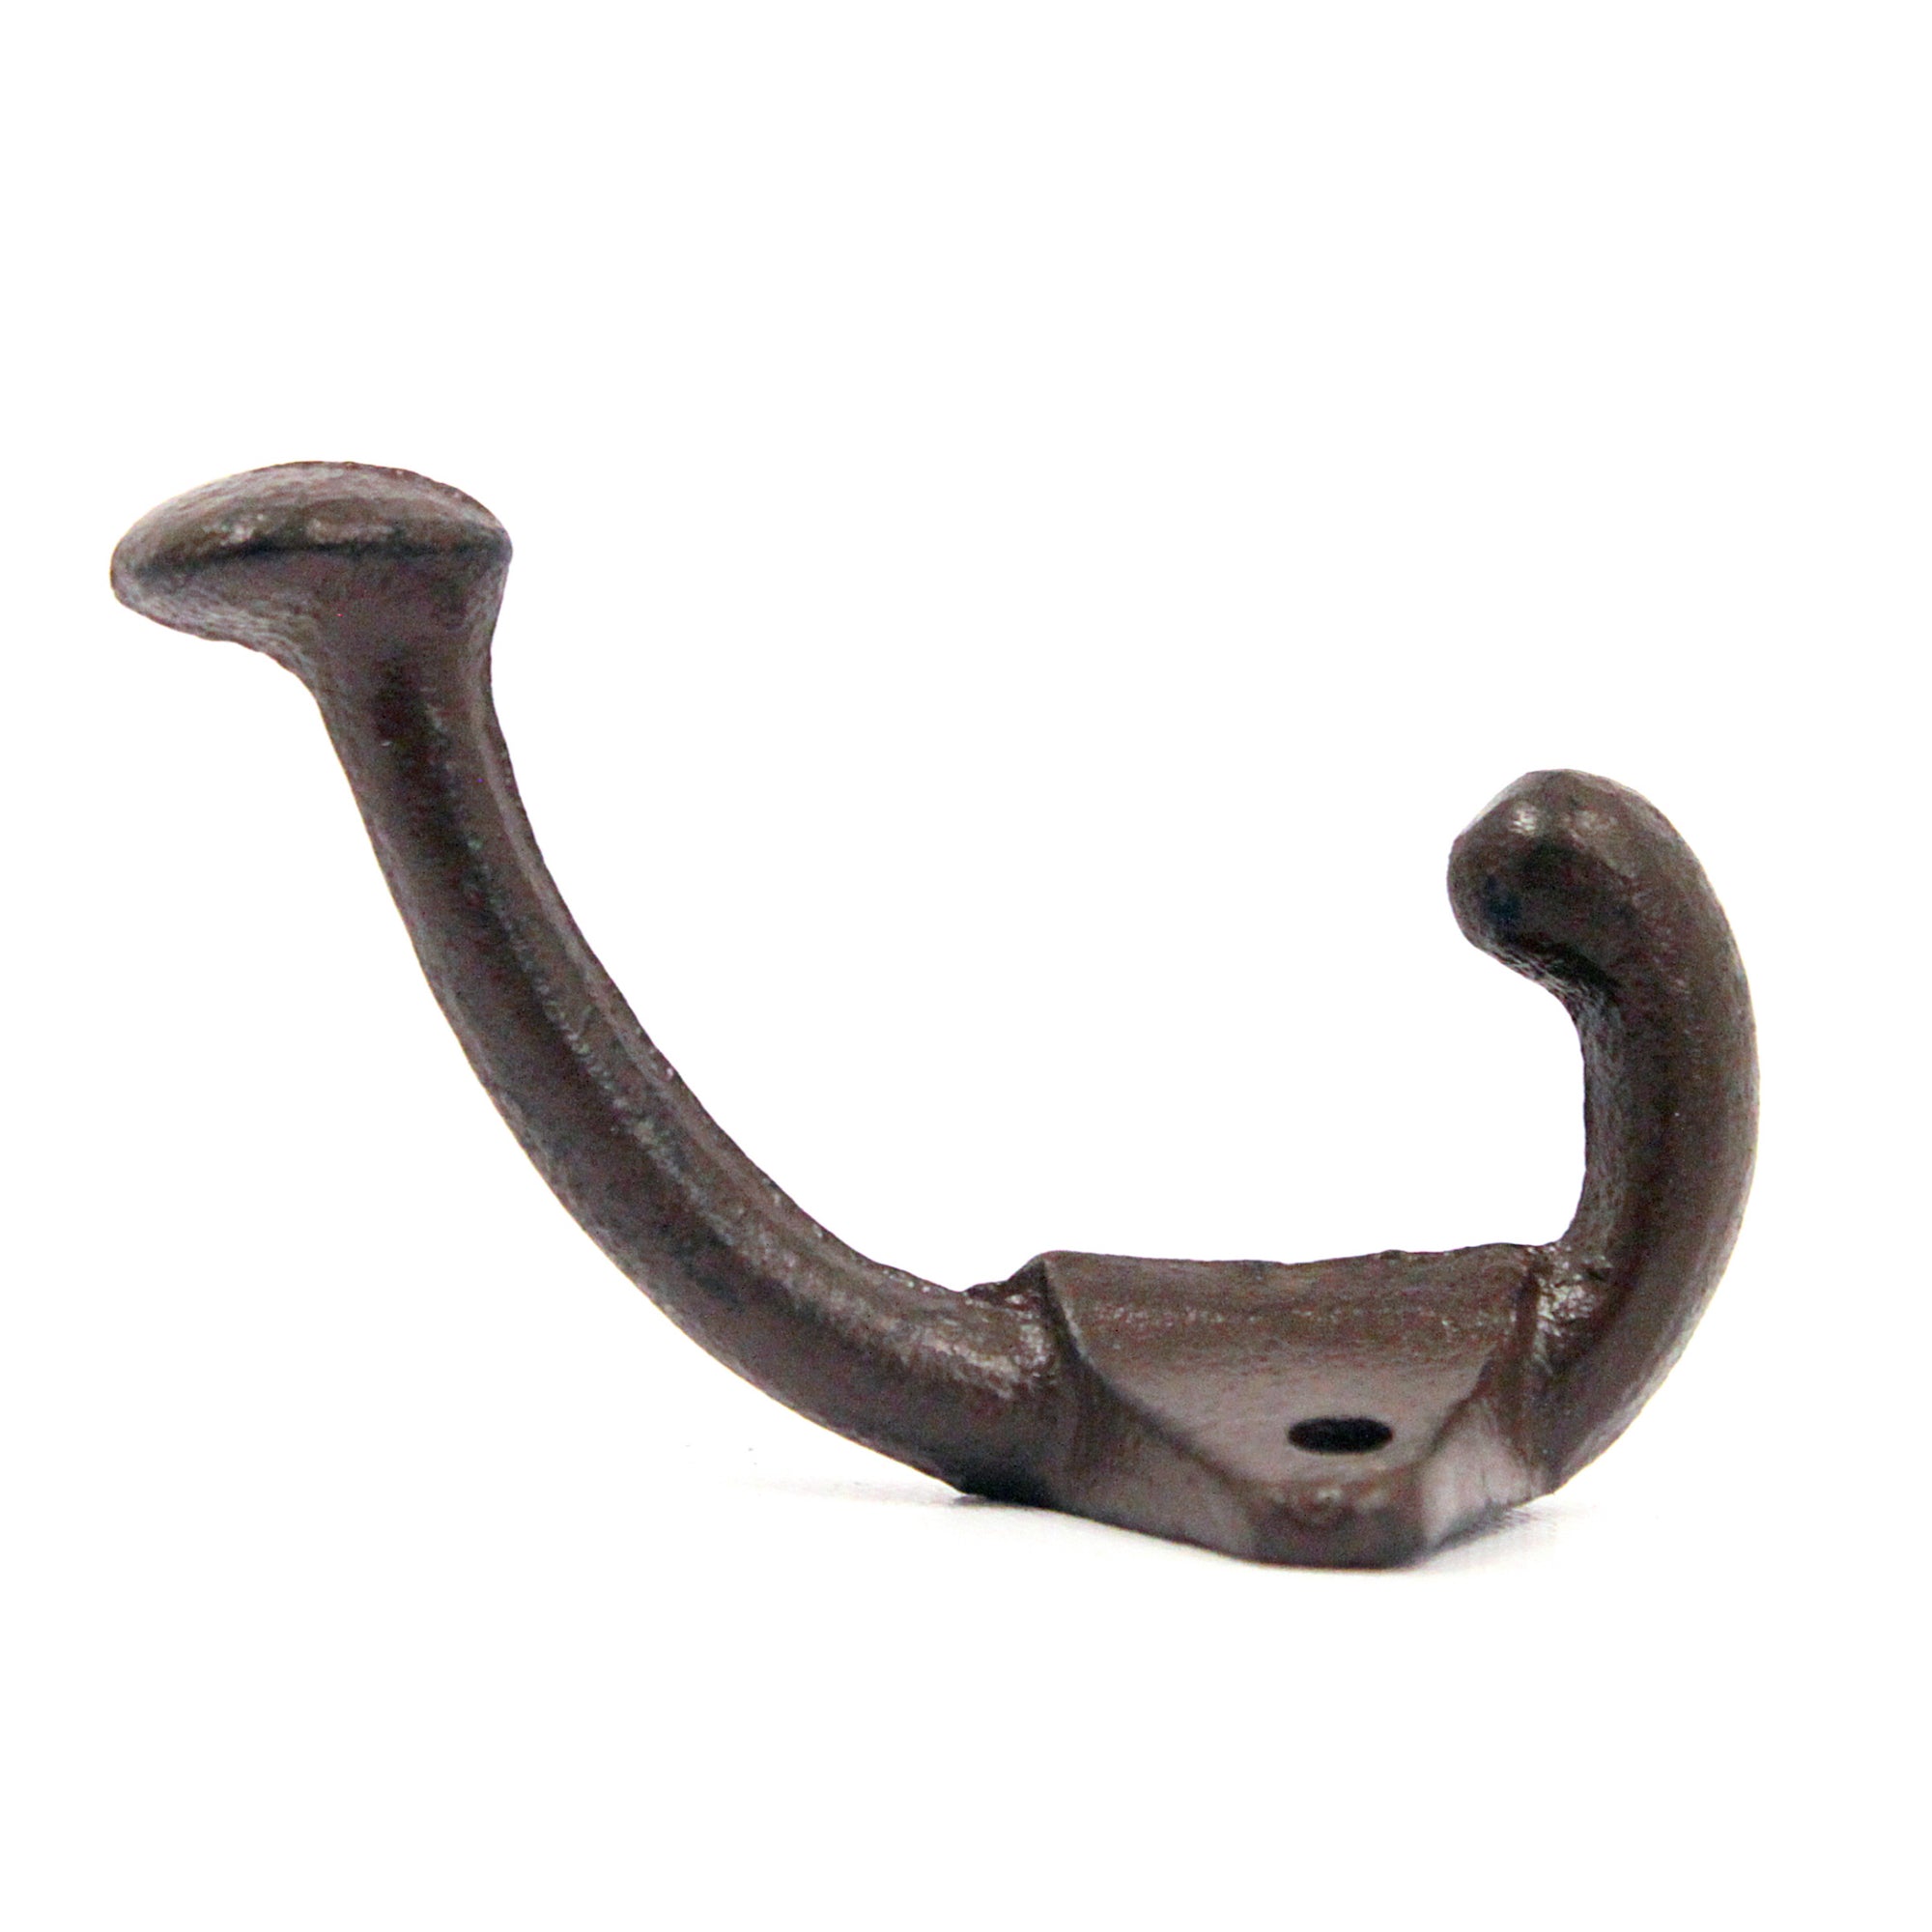 BarnwoodUSA Rustic Antique Brown Cast Iron Wall Hook, Ironic in Nature